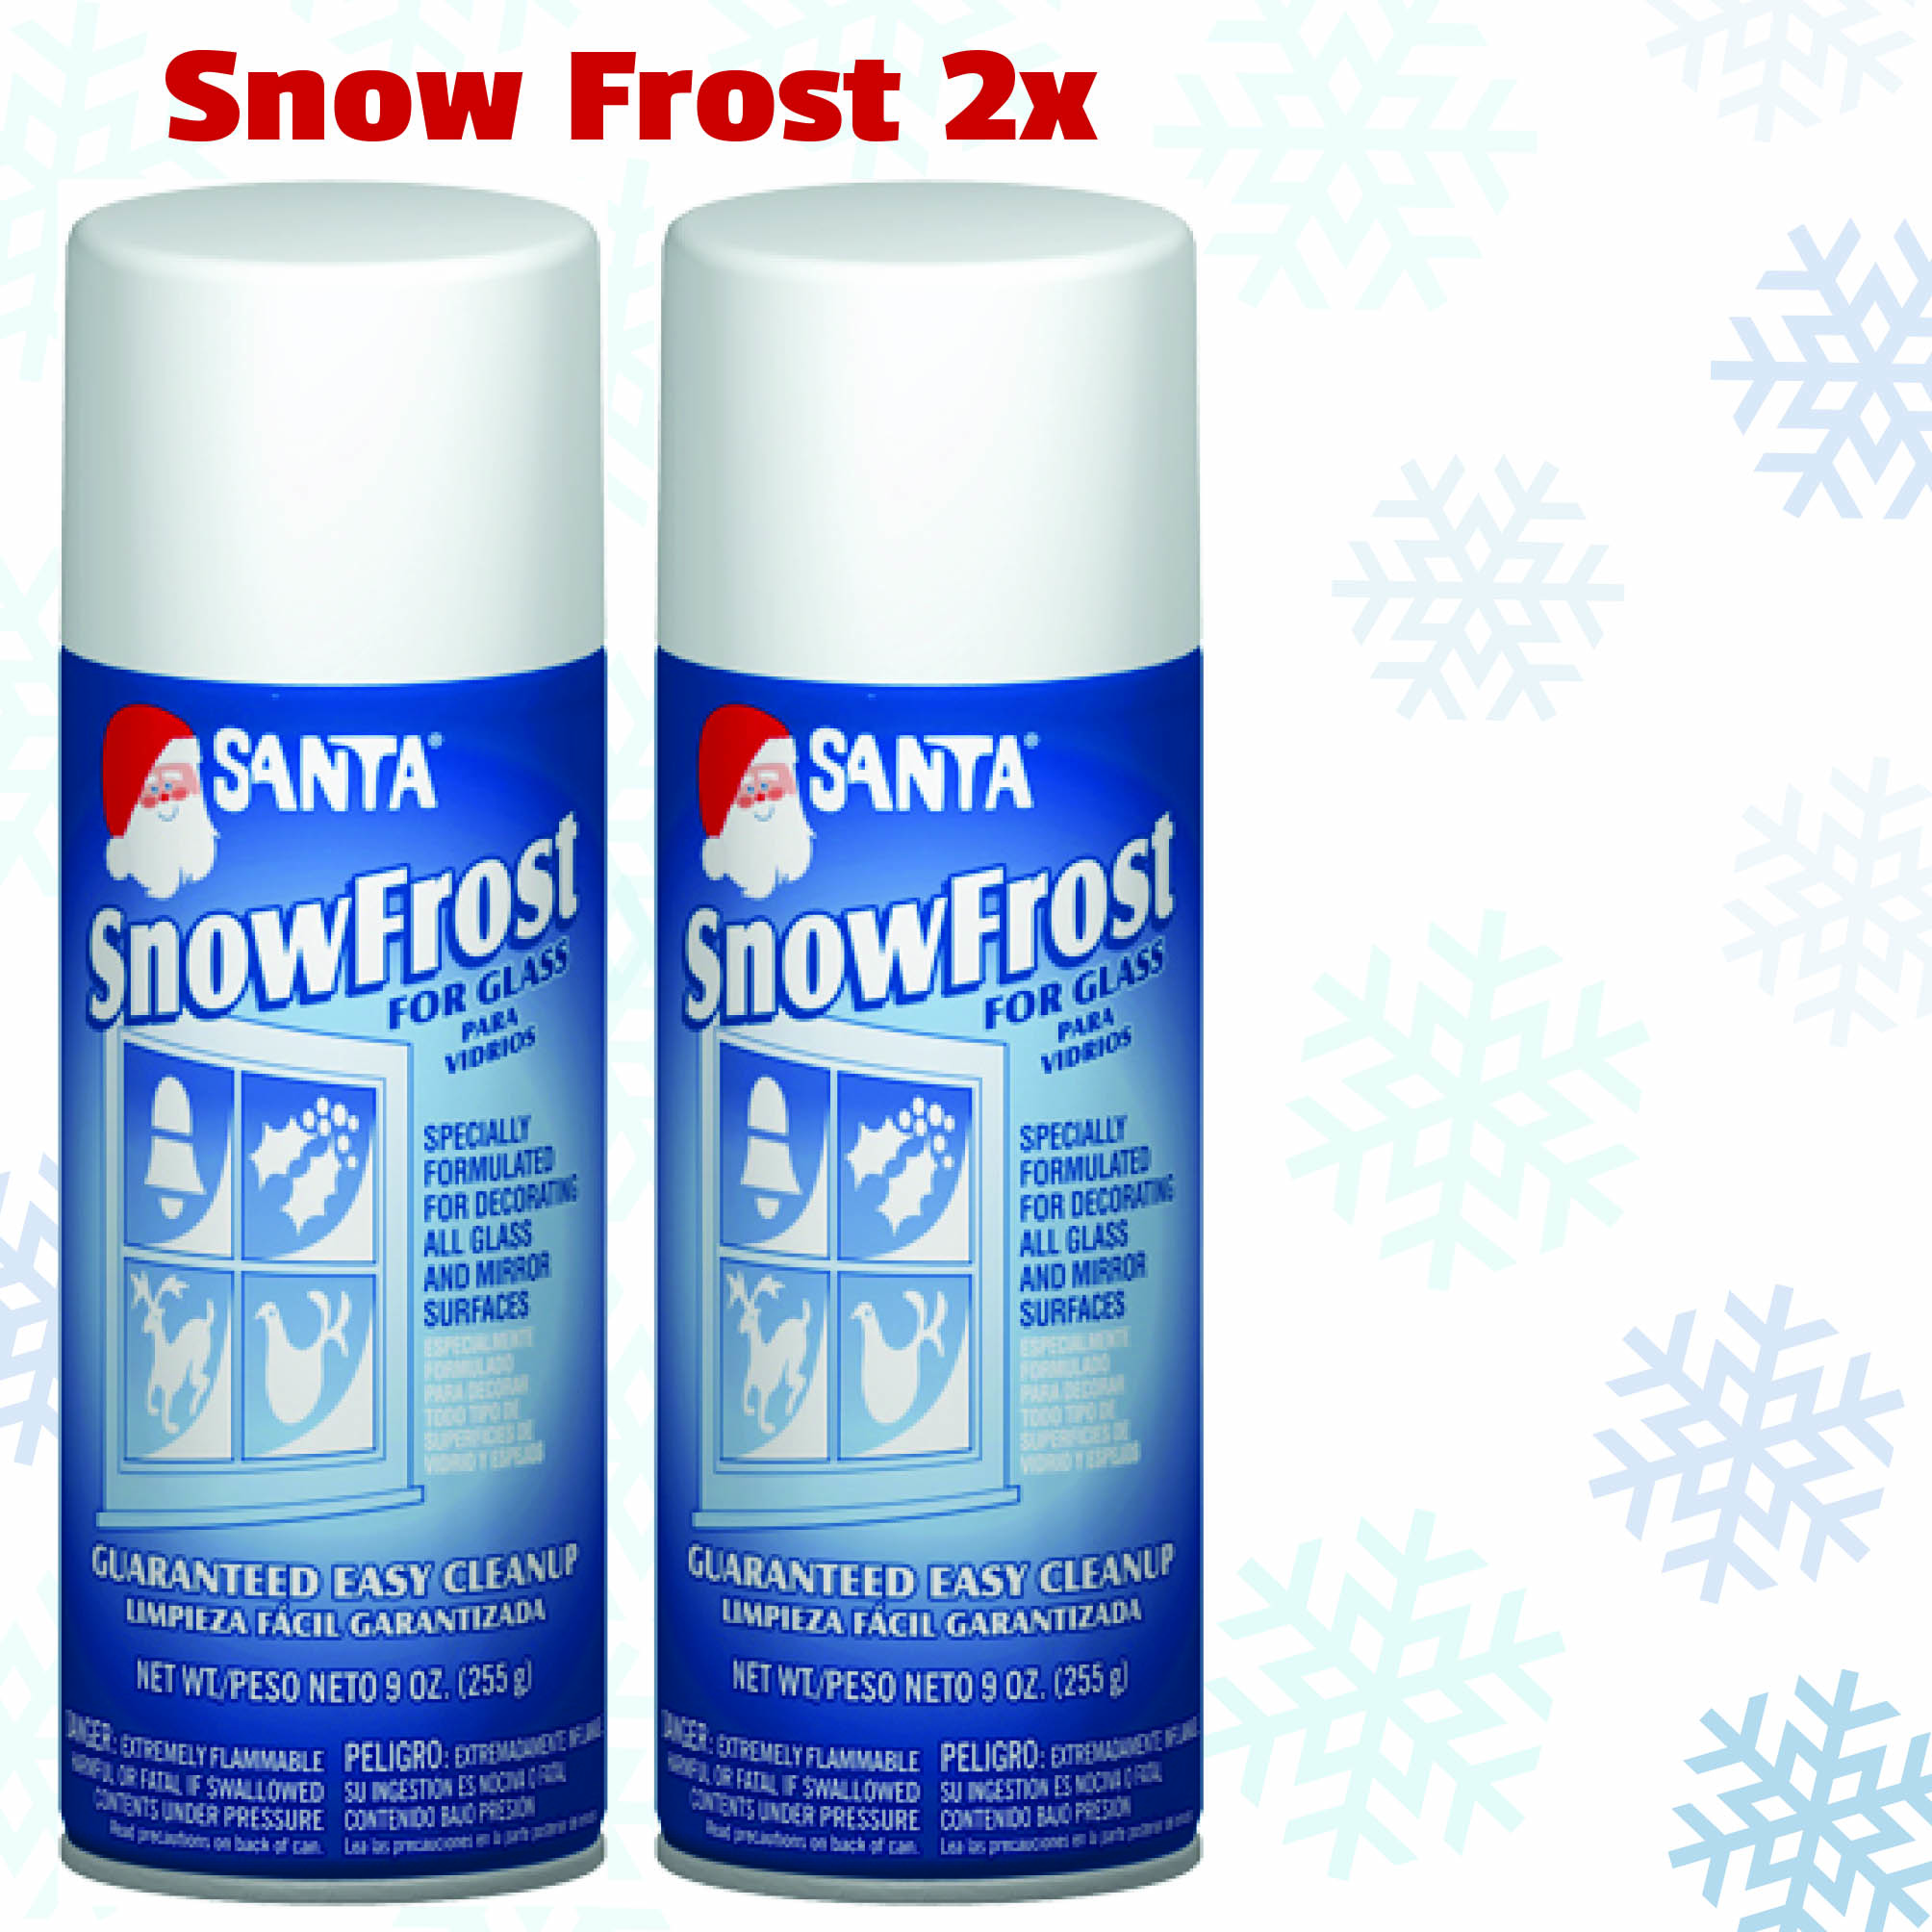 NEW Snow Frost Spray 2x Cans 533ml, Christmas windows,mirrors,decoration